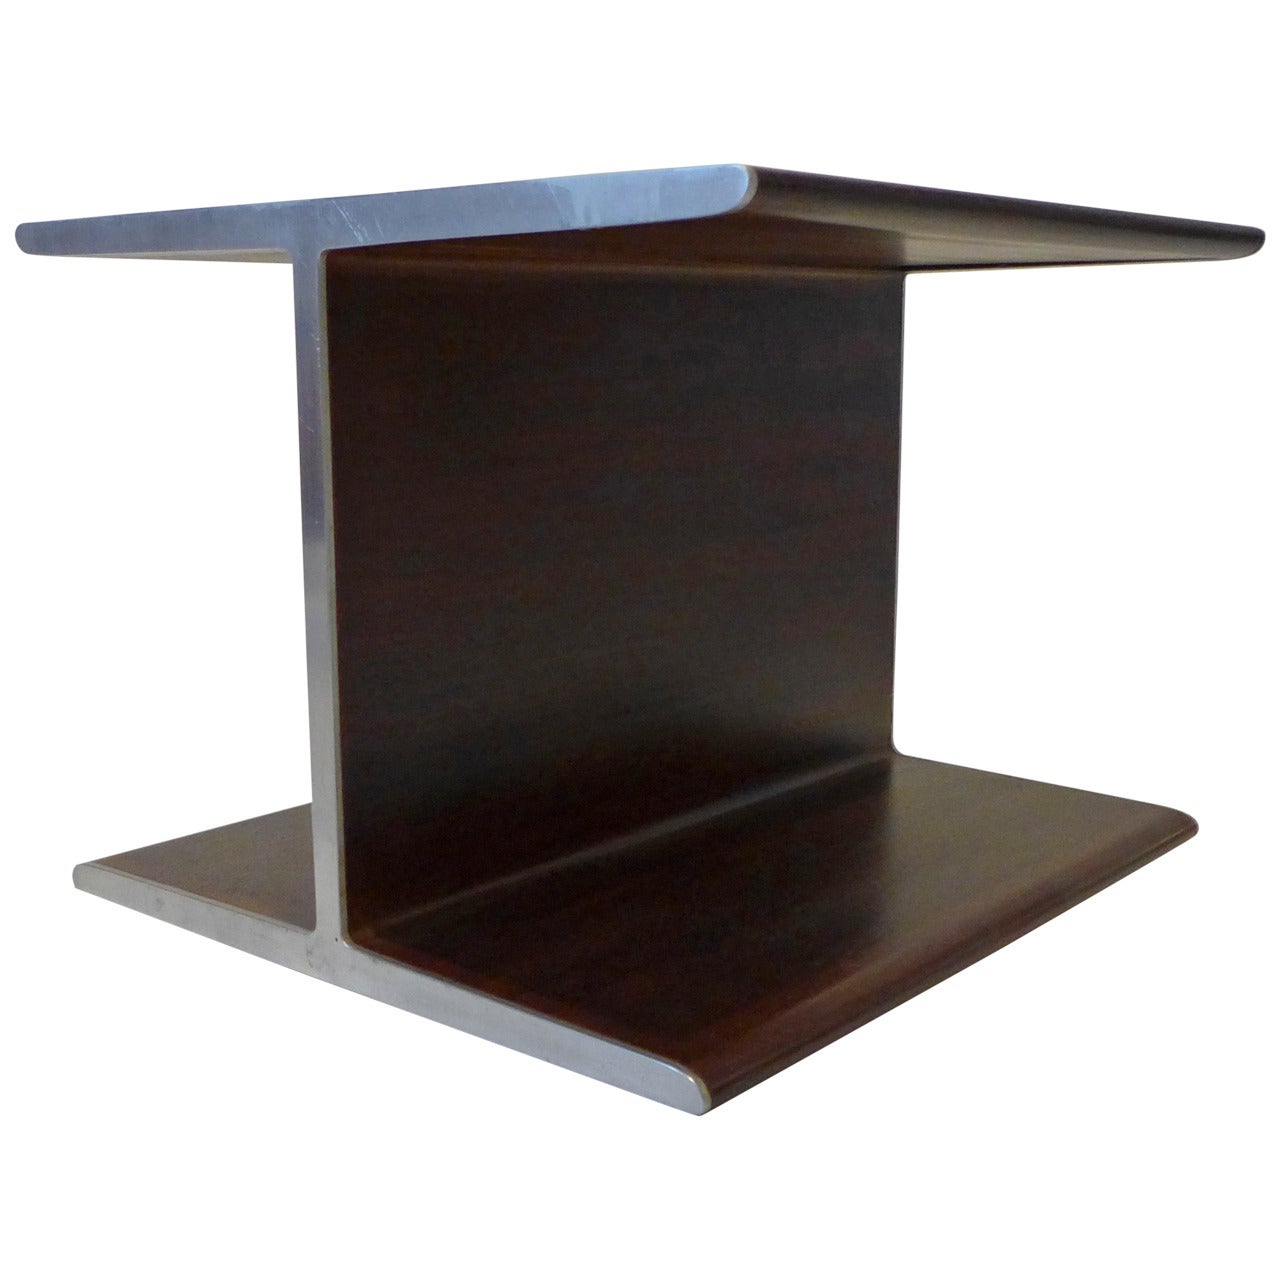 I-Beam Table in Walnut and Steel